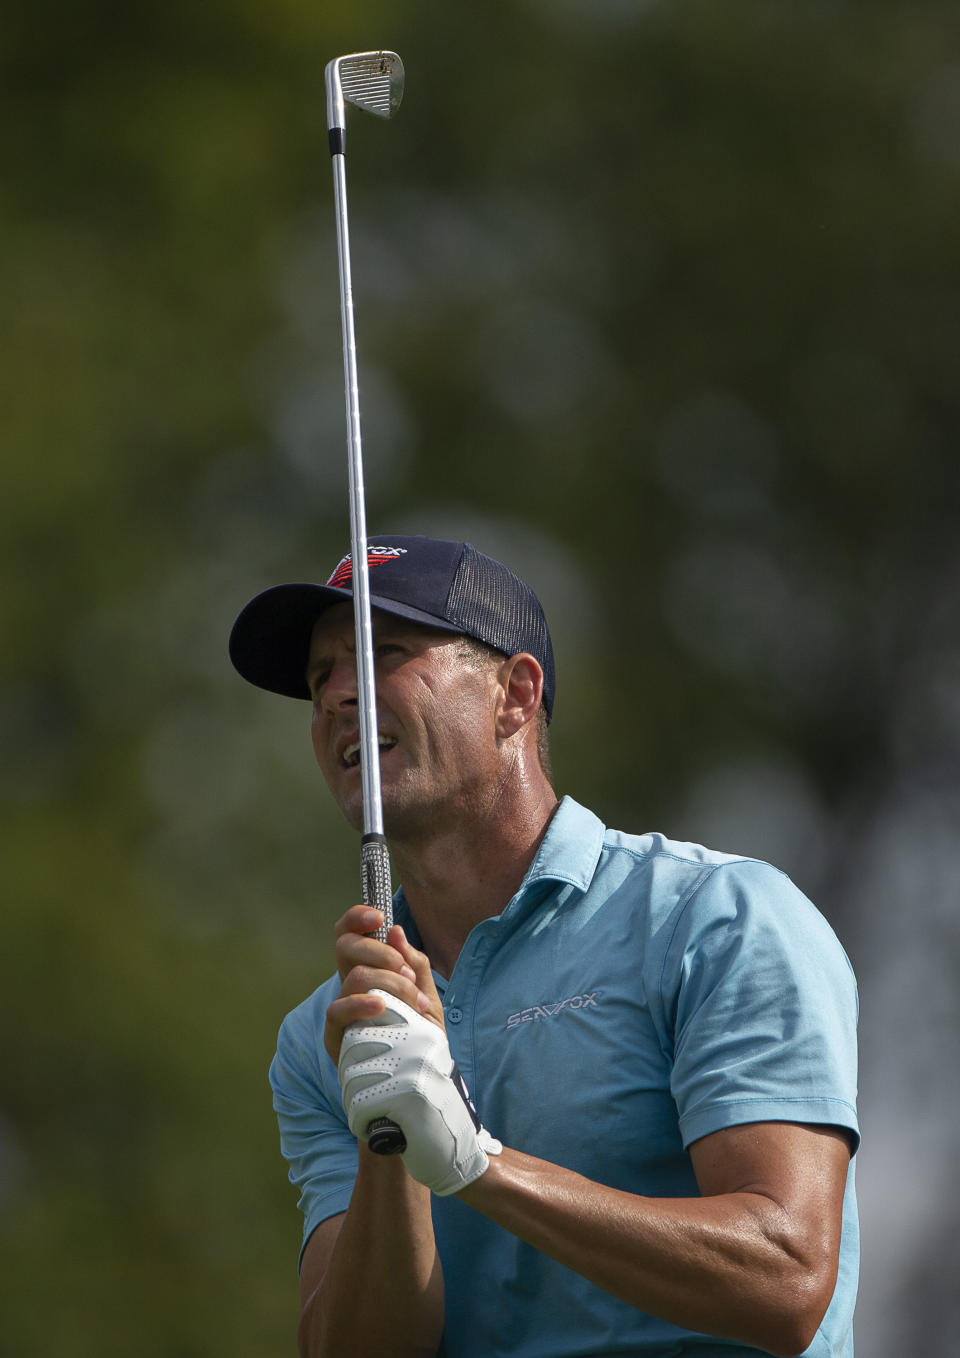 D.J. Trahan reacts to a shot during the second round of the Barbasol Championship golf tournament at Keene Trace Golf Club in Nicholasville, Ky., Friday, July 19, 2019. (Ryan C. Hermens/Lexington Herald-Leader via AP)